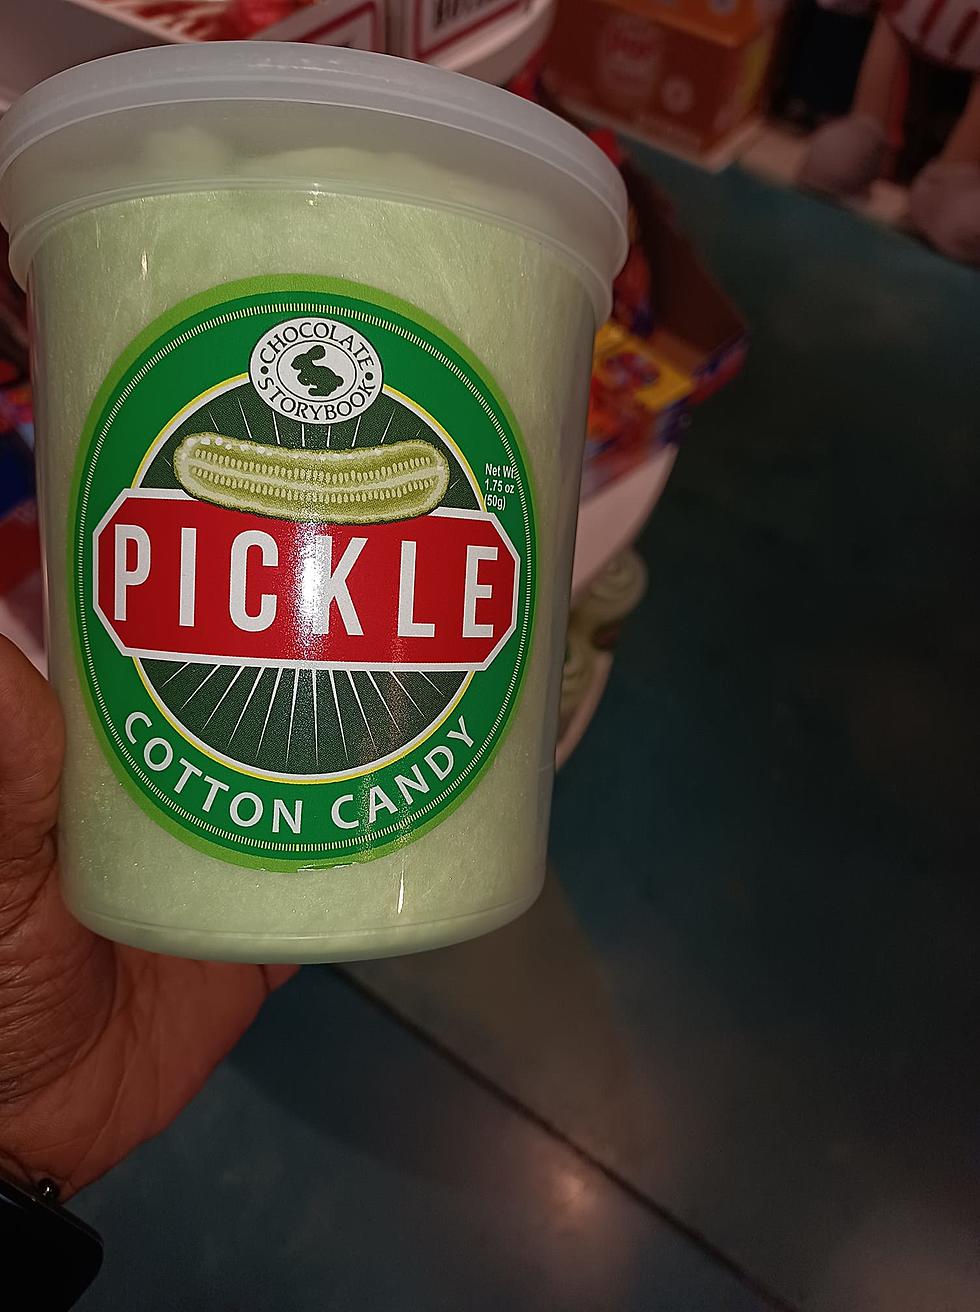 Here's Where You Can Get Pickle Cotton Candy